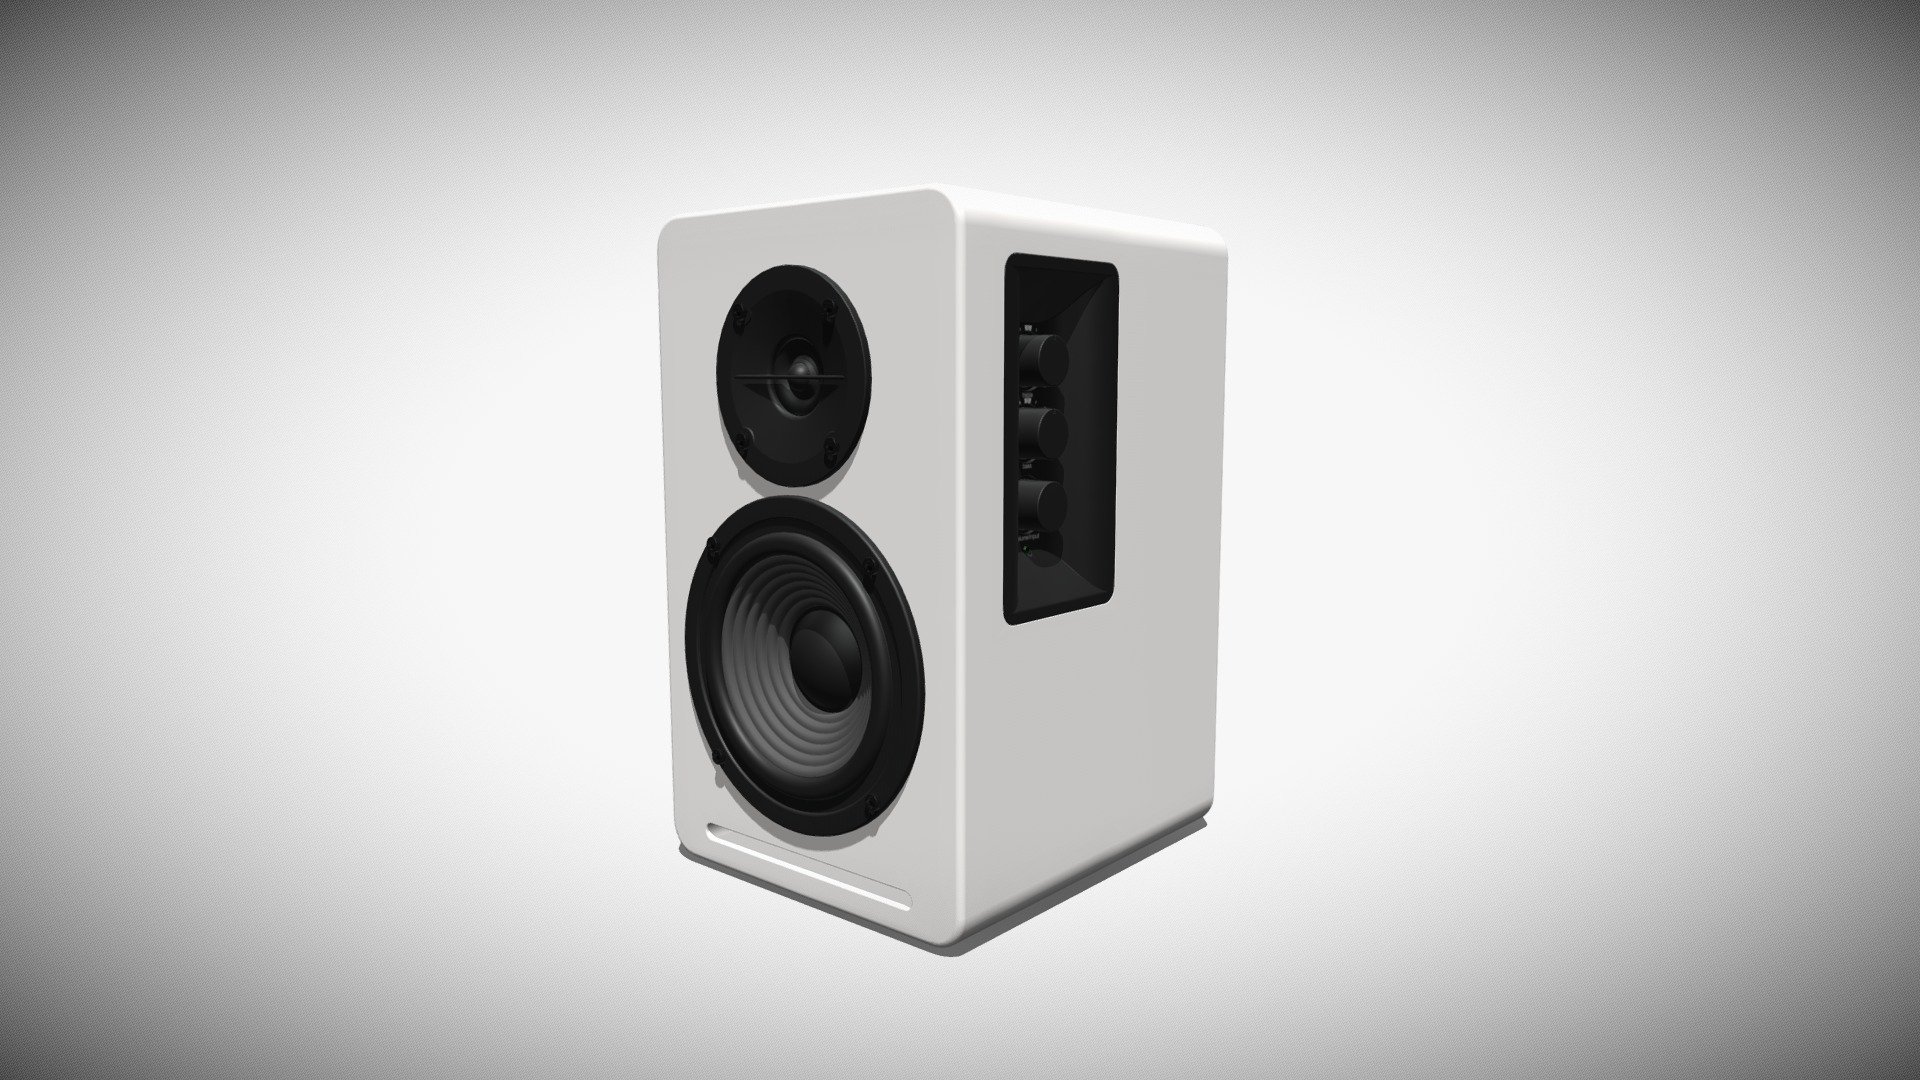 Detailed 3D model of a white Bookshelf Active Speaker, modeled in Cinema 4D. The model was created using approximate real world dimensions.

The model has 37,559 polys and 37,738 vertices.

An additional file has been provided containing the original Cinema 4D project files with both standard and v-ray materials, textures and other 3d export files such as 3ds, fbx and obj 3d model